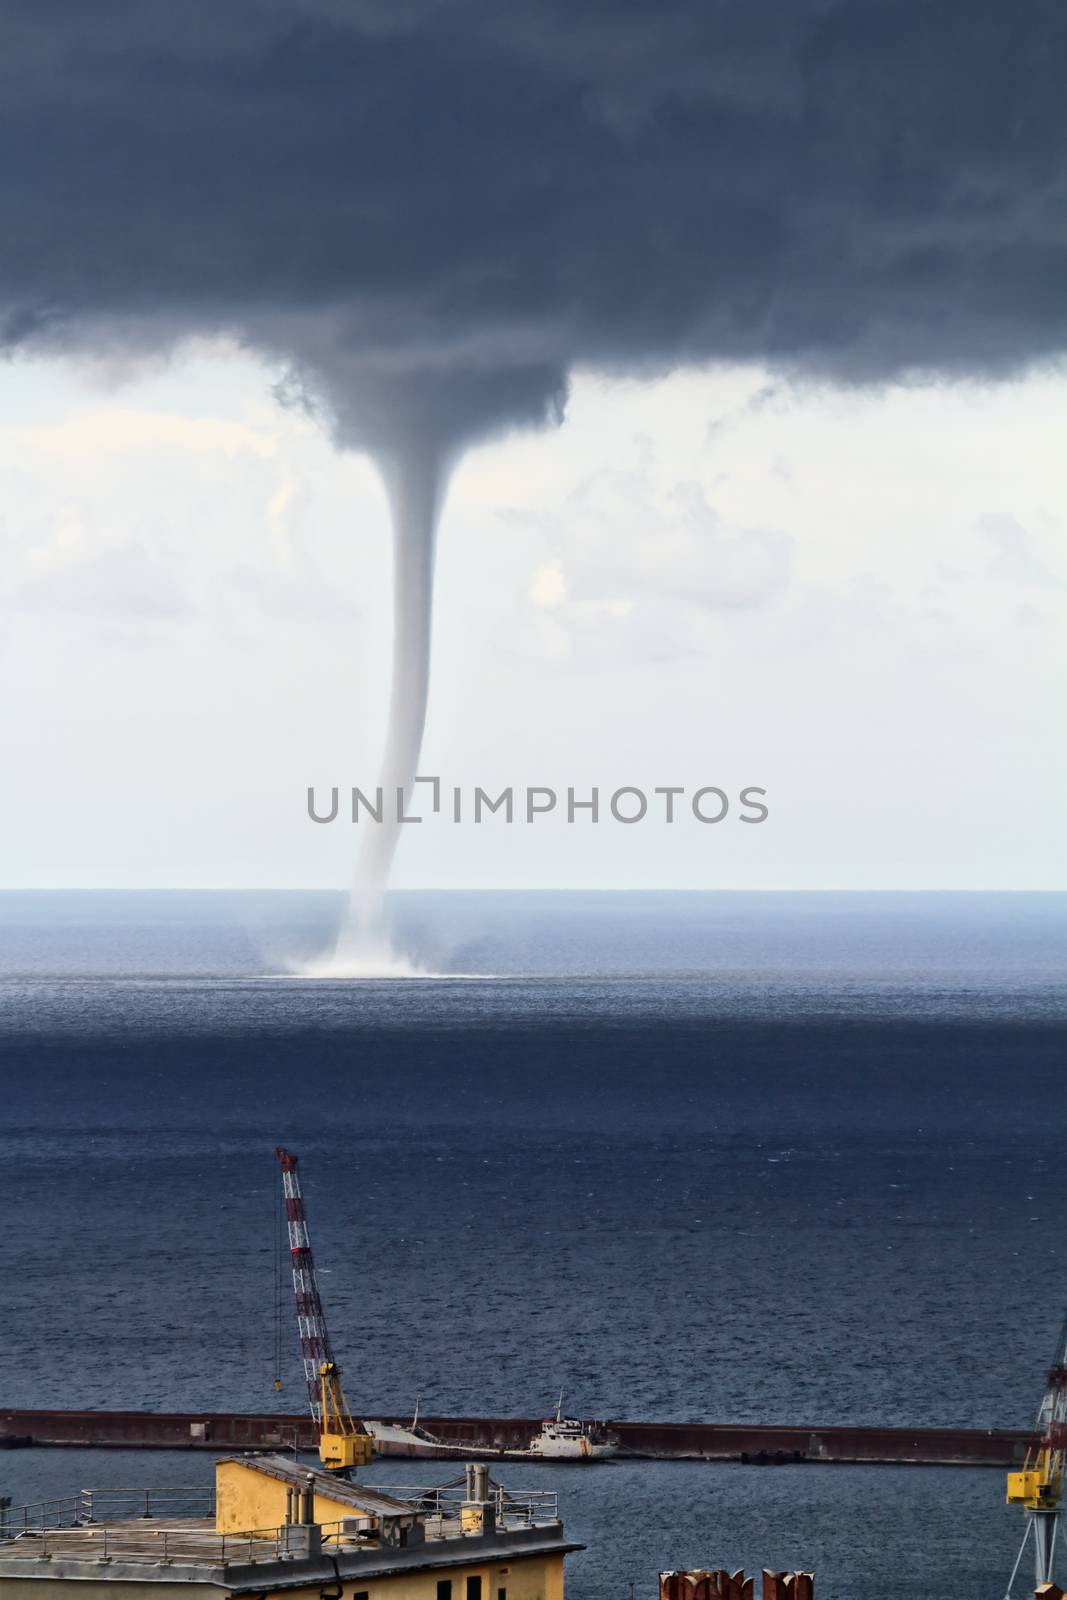 Huge waterspout over the port of Genova, Italy